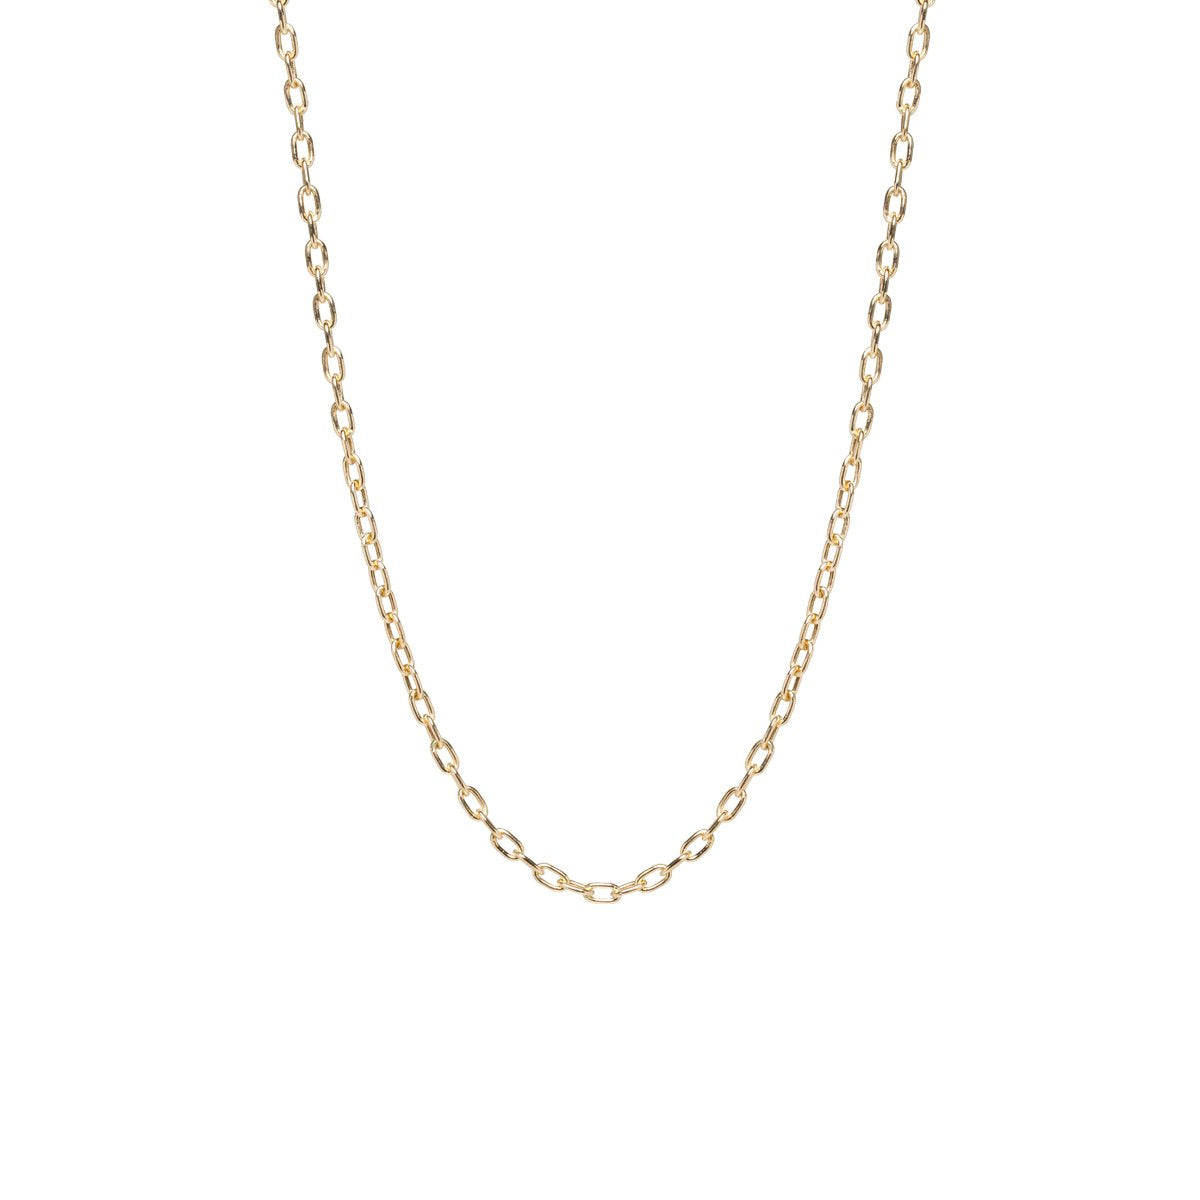 Small Square Oval Link Chain Necklace